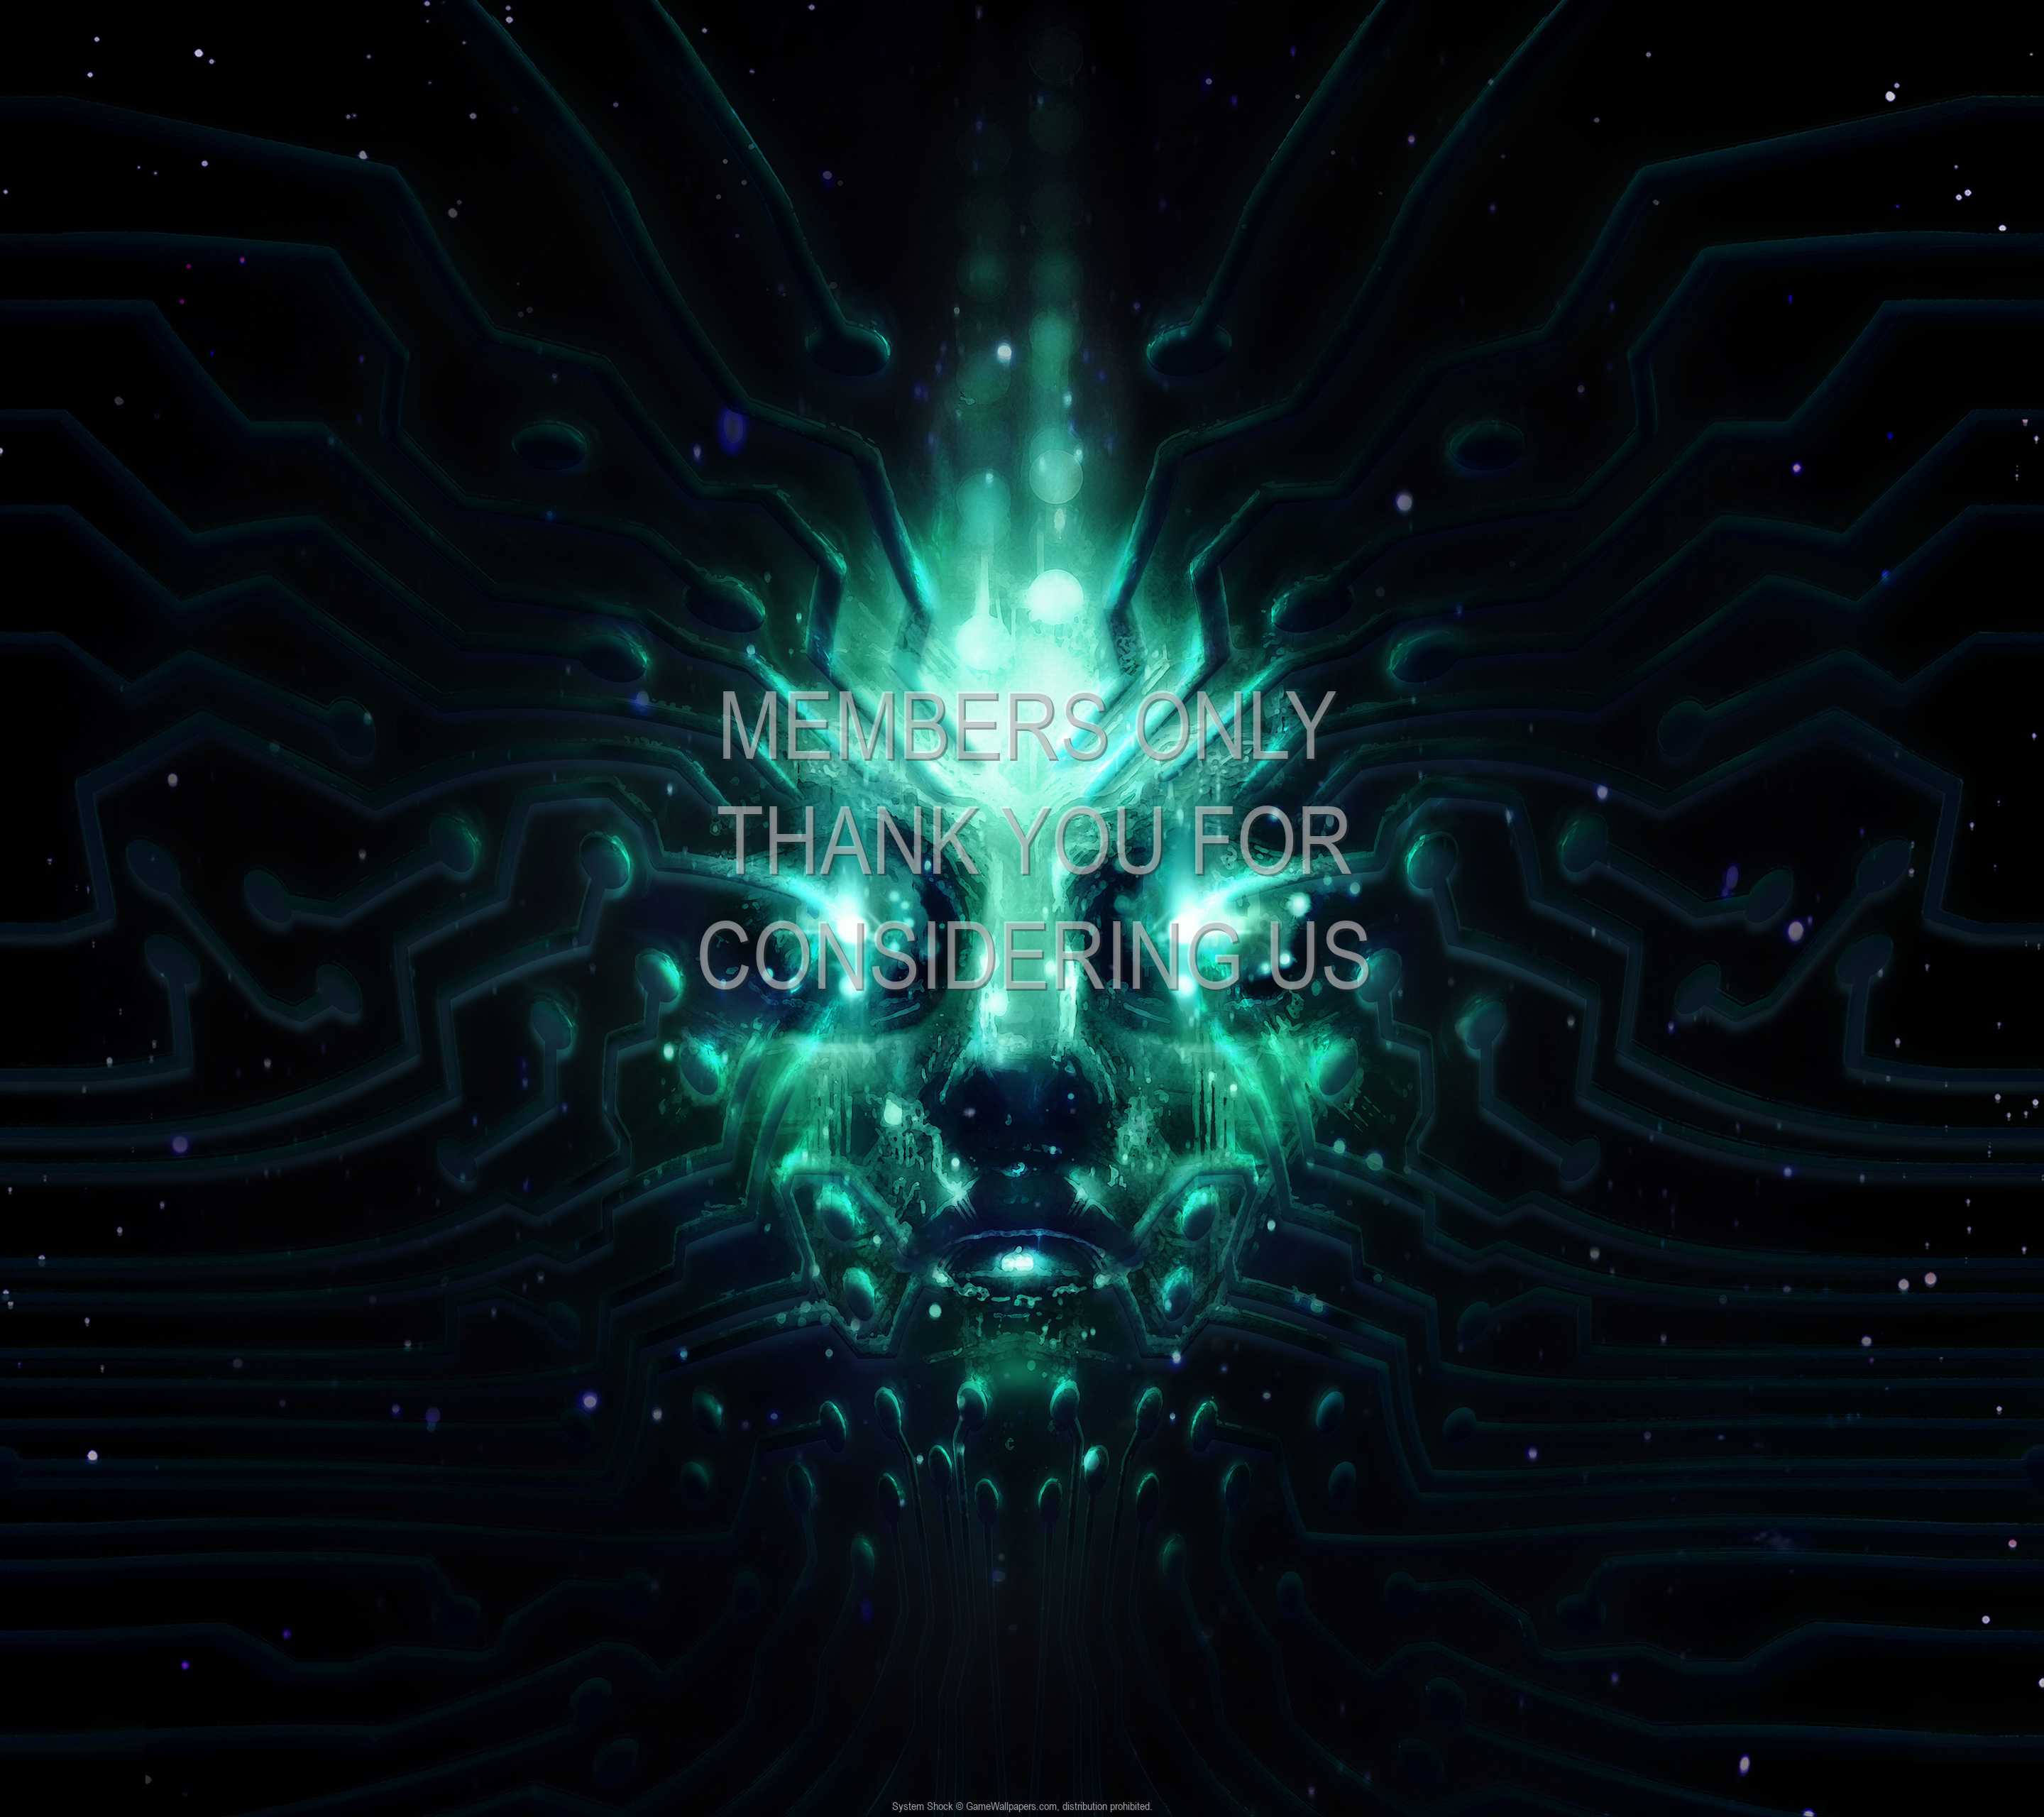 System Shock 1440p Horizontal Mobile wallpaper or background 01